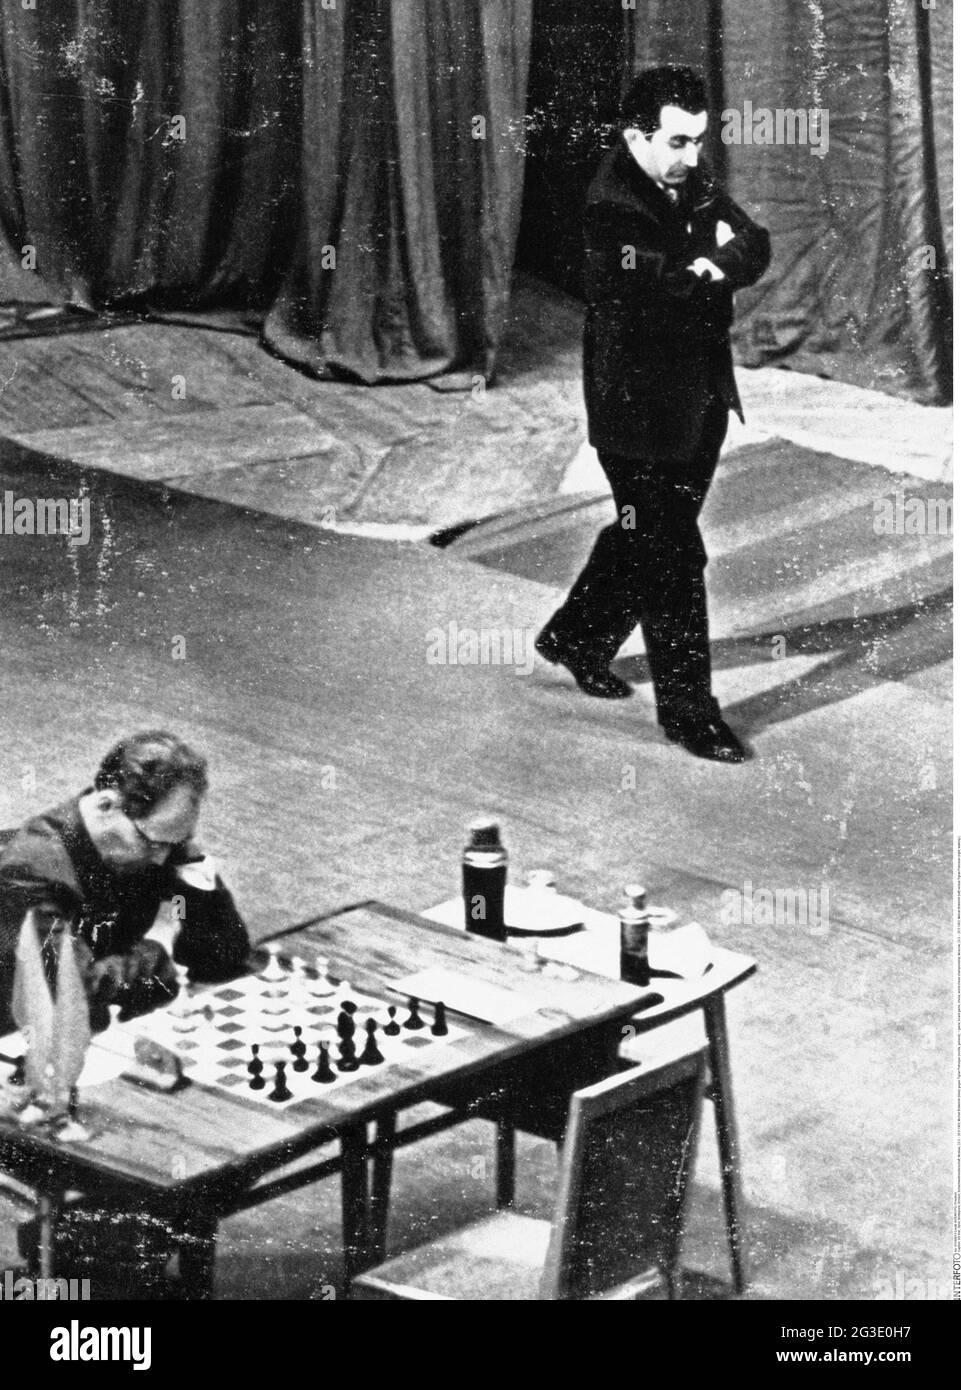 Chess.com - It's the 50th anniversary of the Match of the